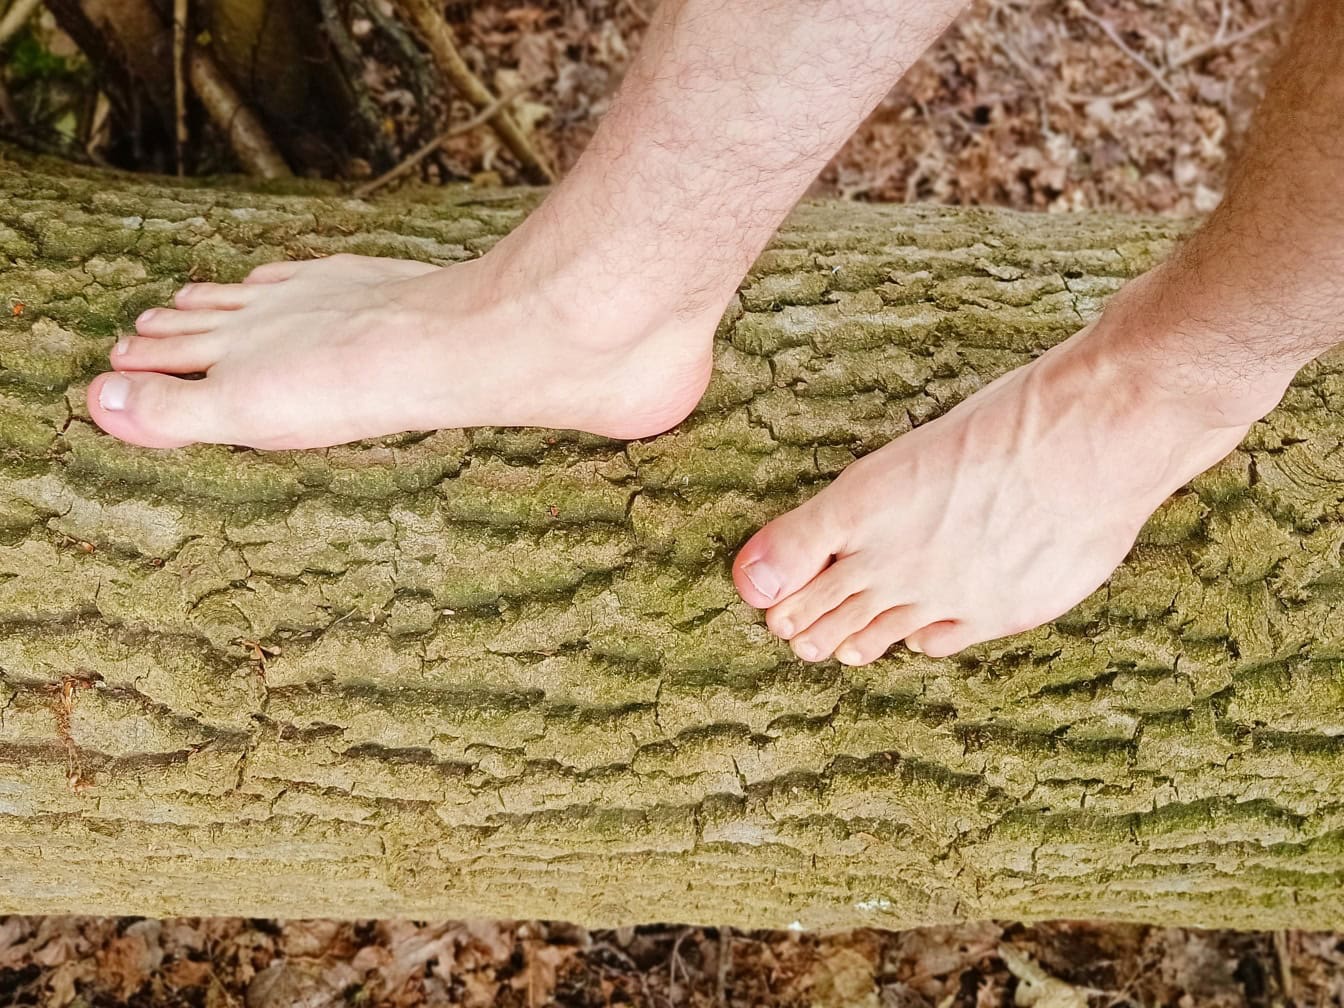 Barefoot feet of a person on a tree trunk